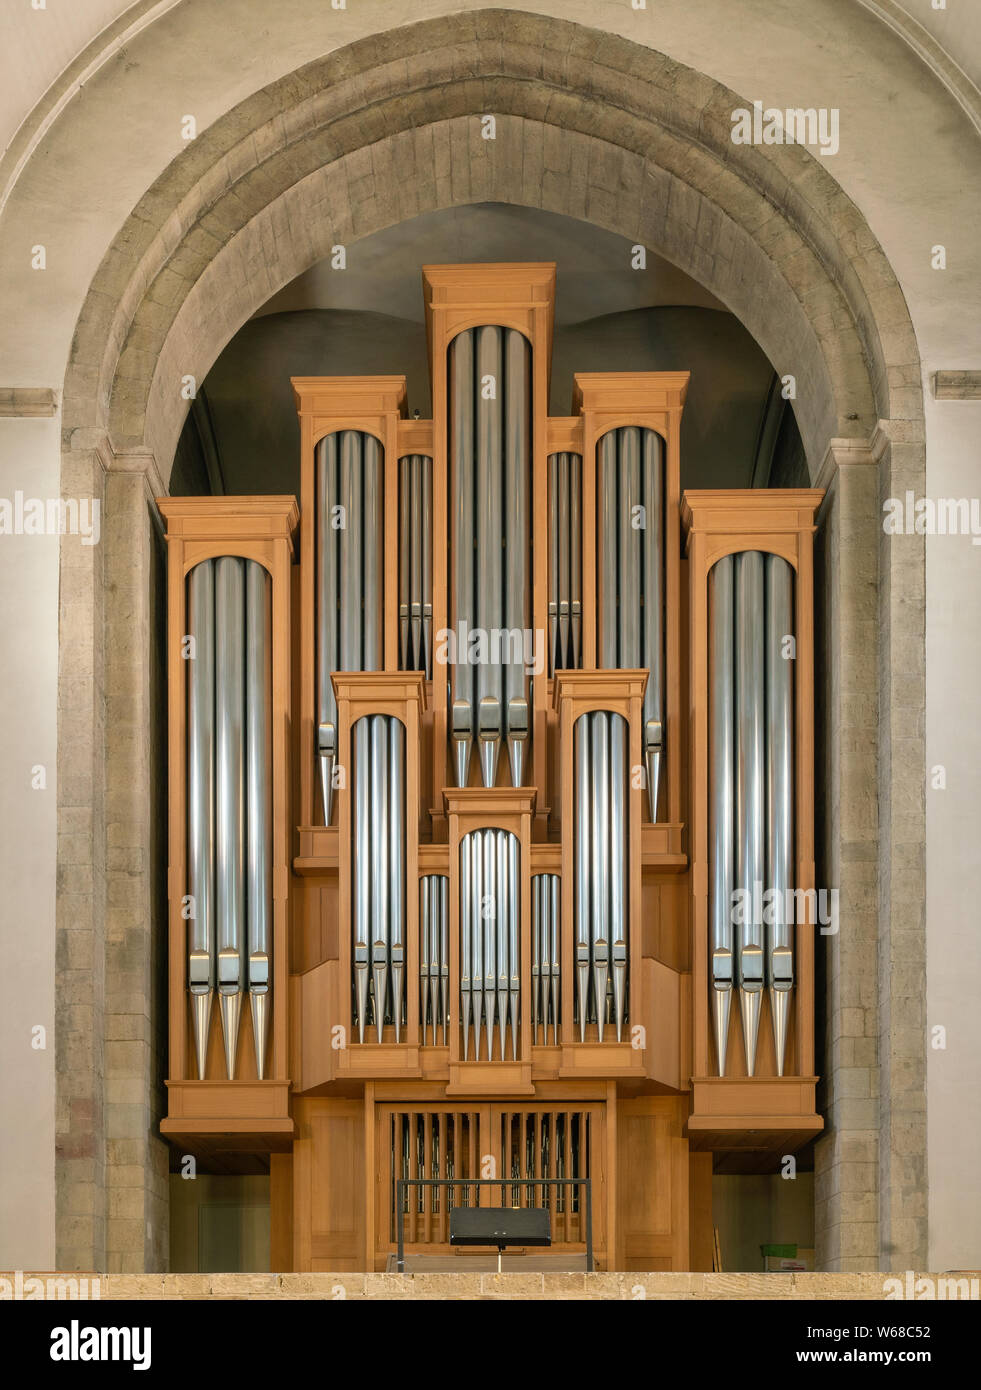 COLOGNE, GERMANY - JULY 17, 2019: Modern organ of Church St. Aposteln on July 17, 2019 in Cologne, Germany Stock Photo